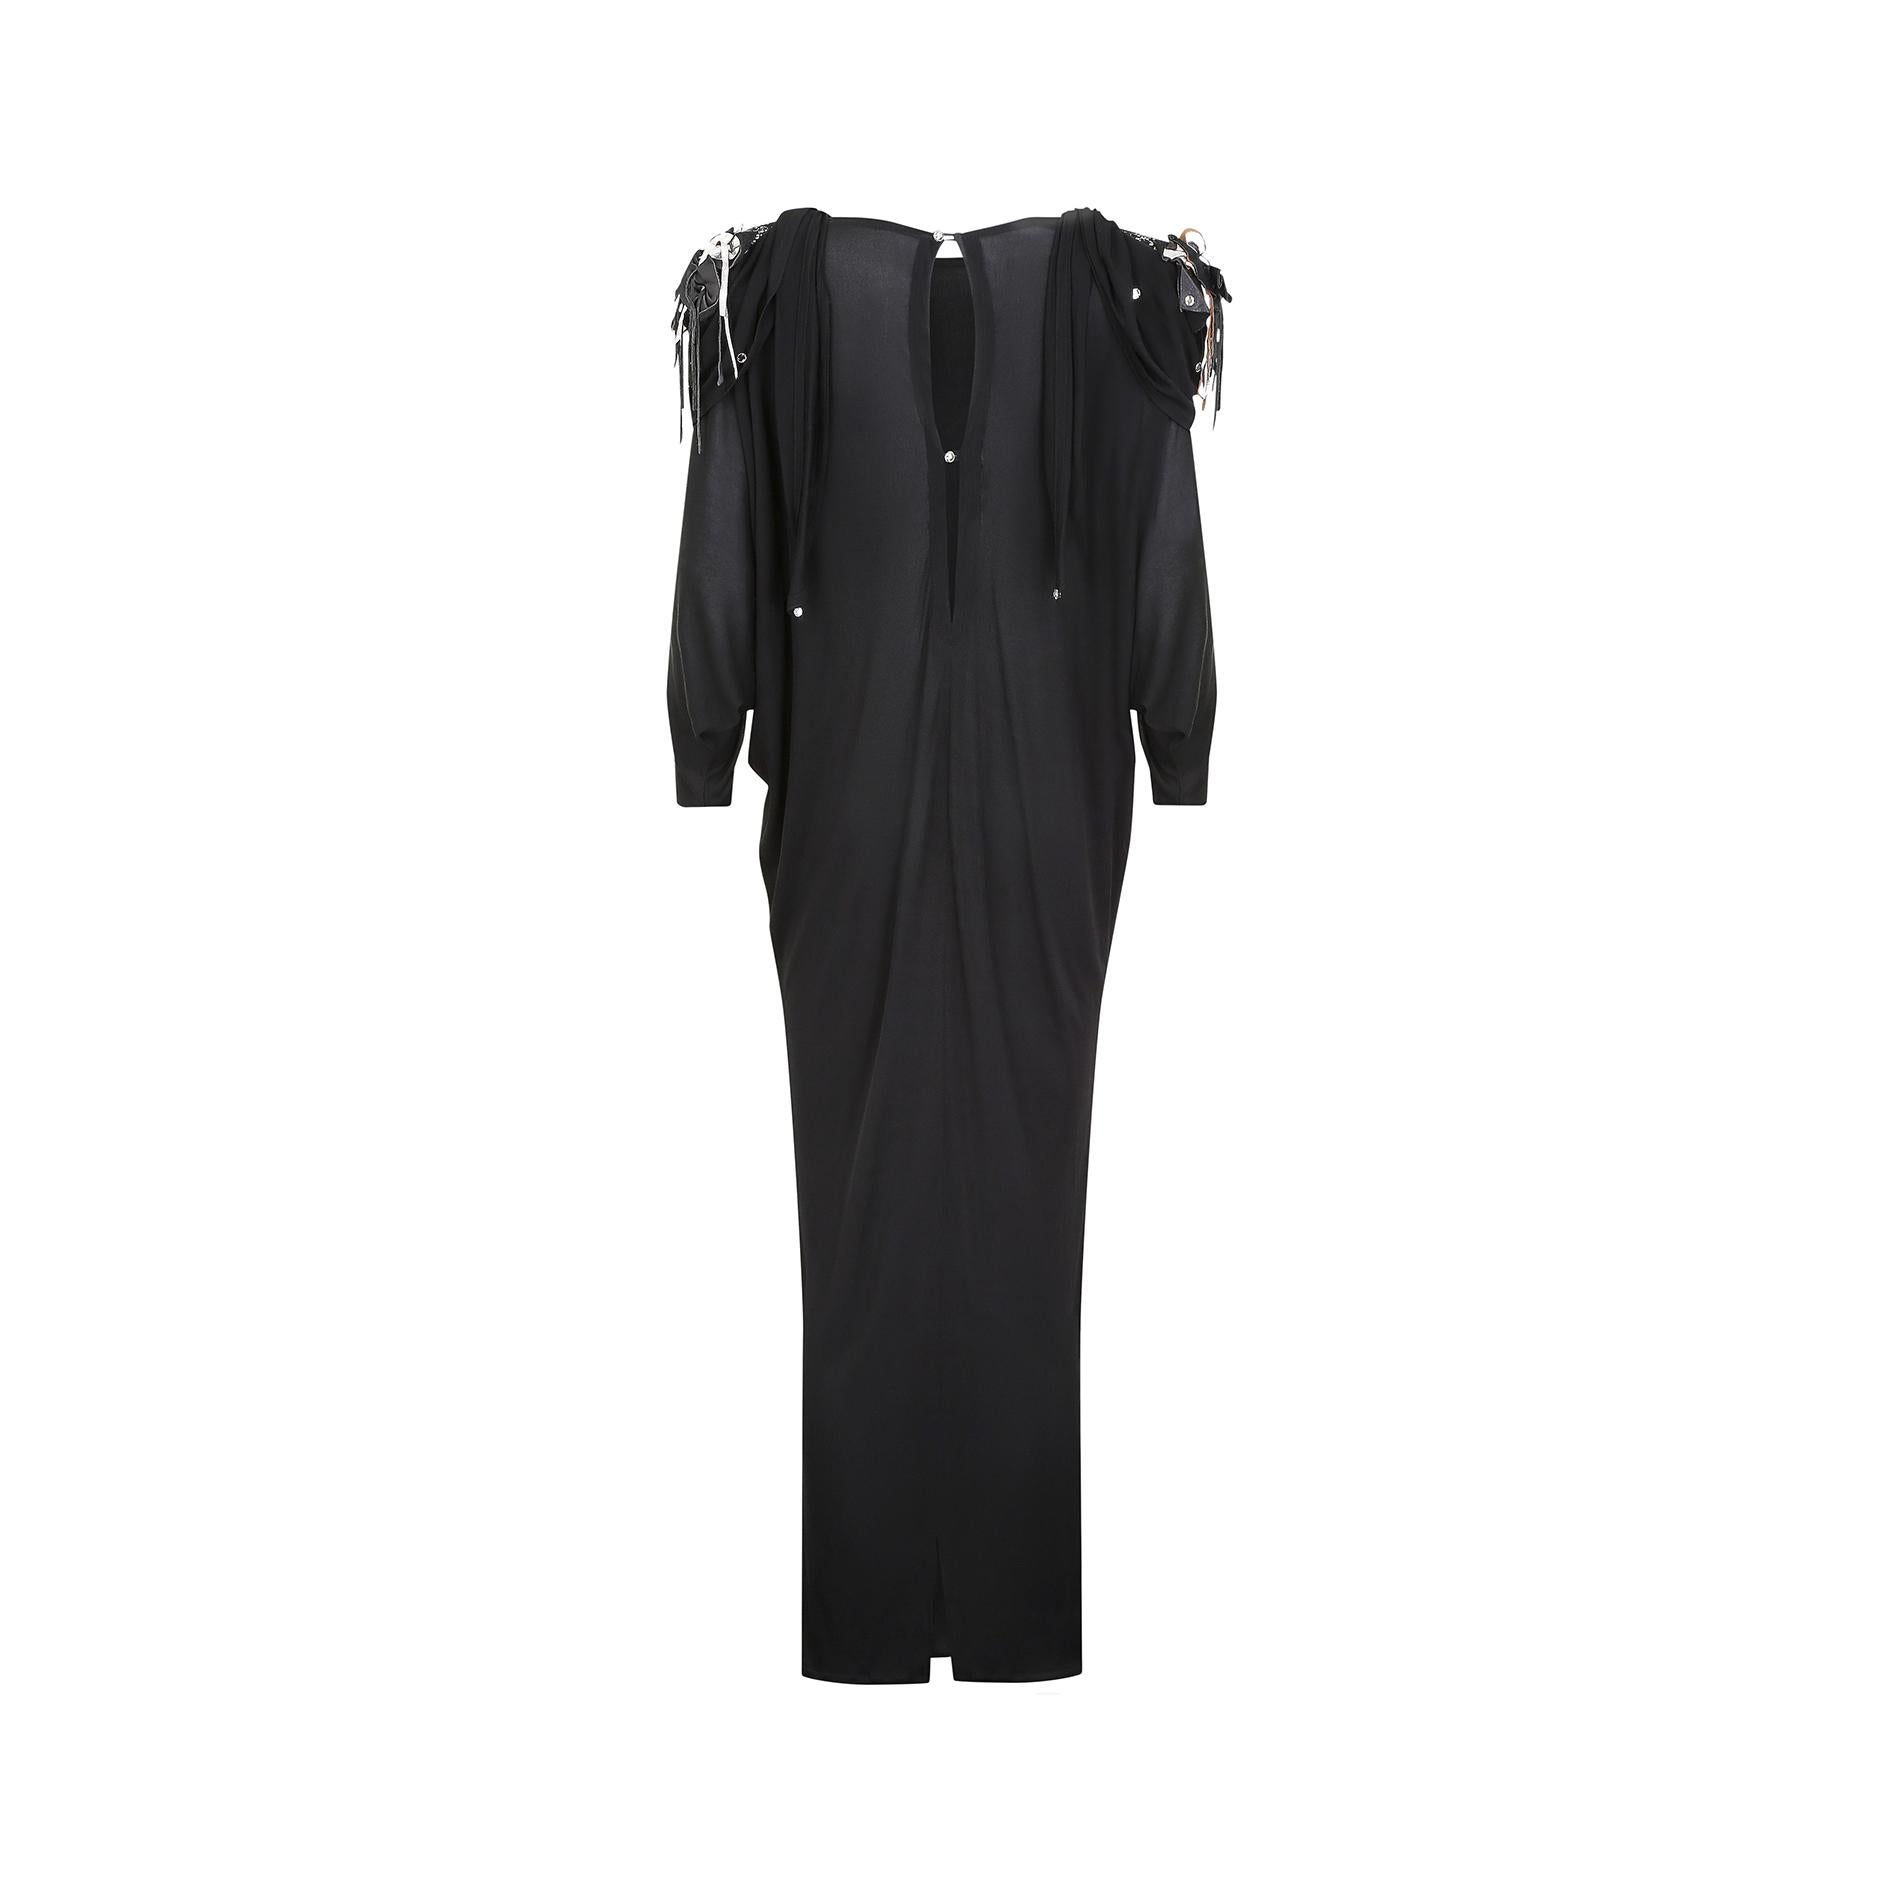 Women's 1980s Black Silk Jersey Batwing Dress with Leather Applique For Sale